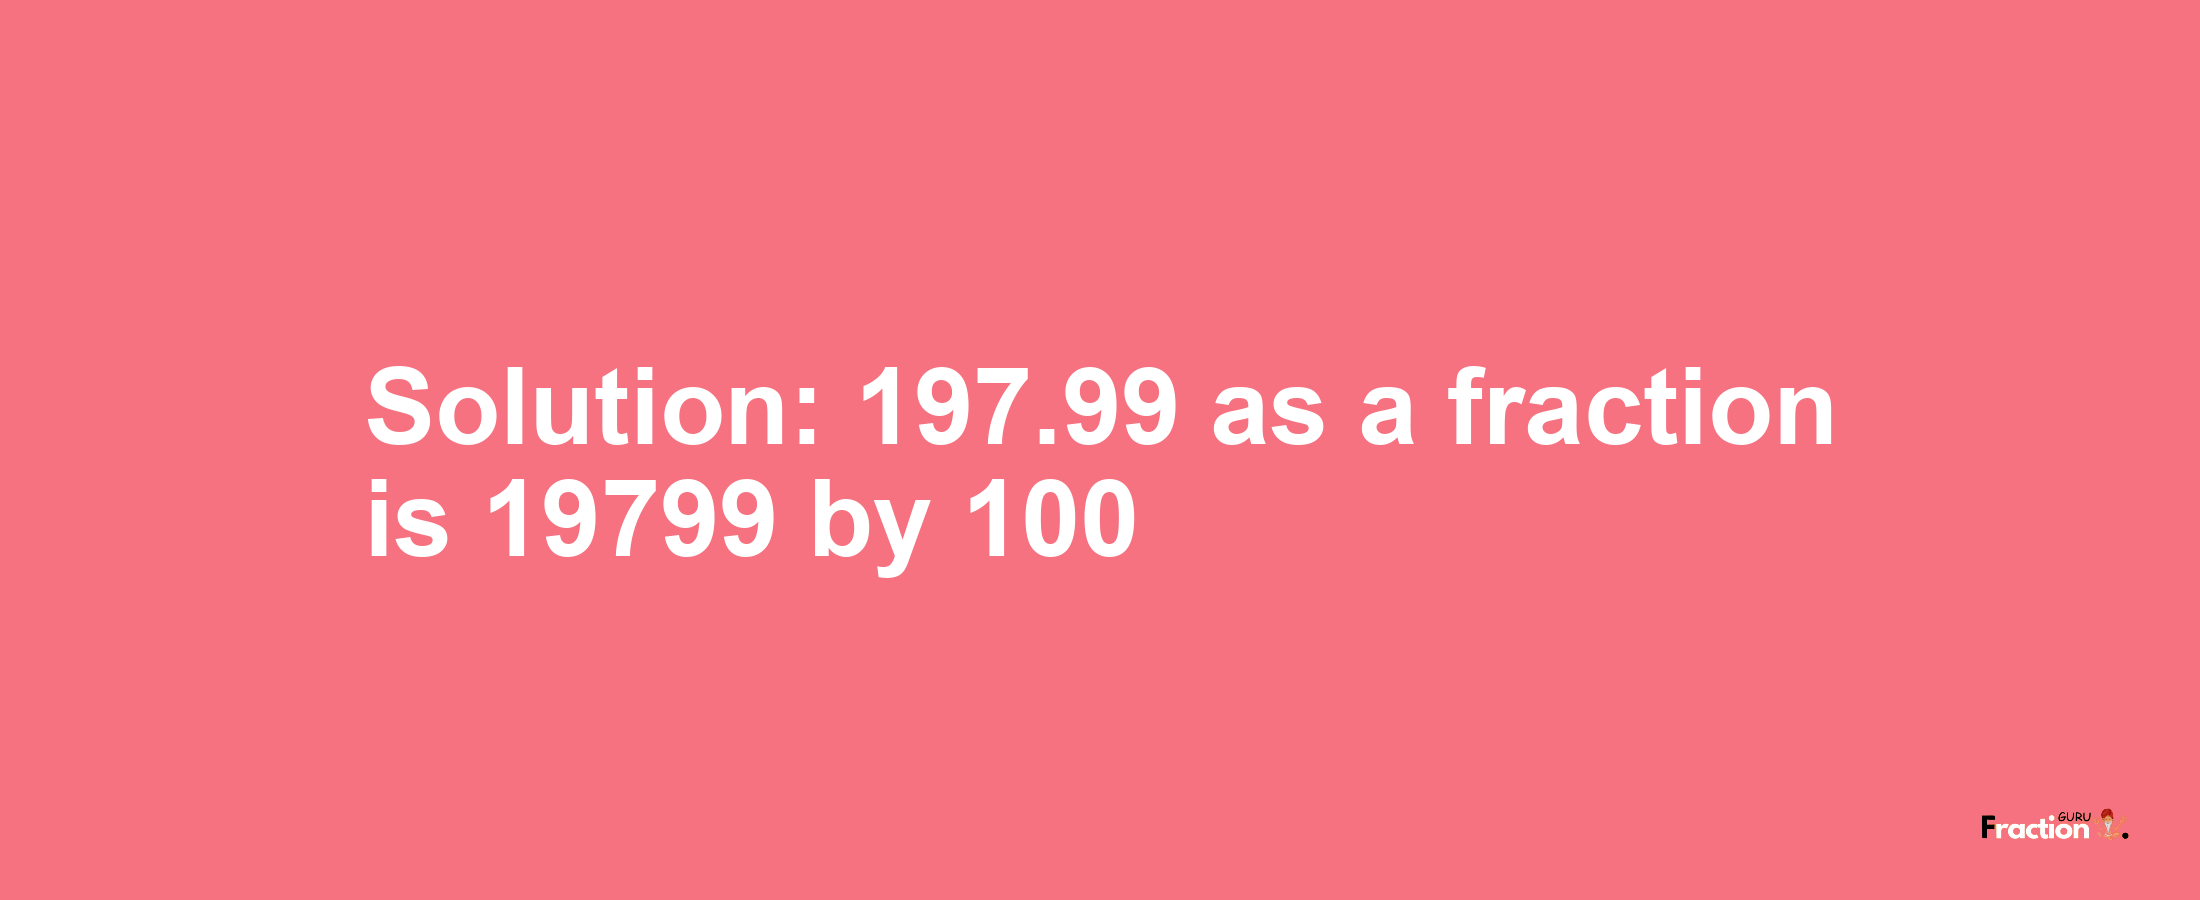 Solution:197.99 as a fraction is 19799/100